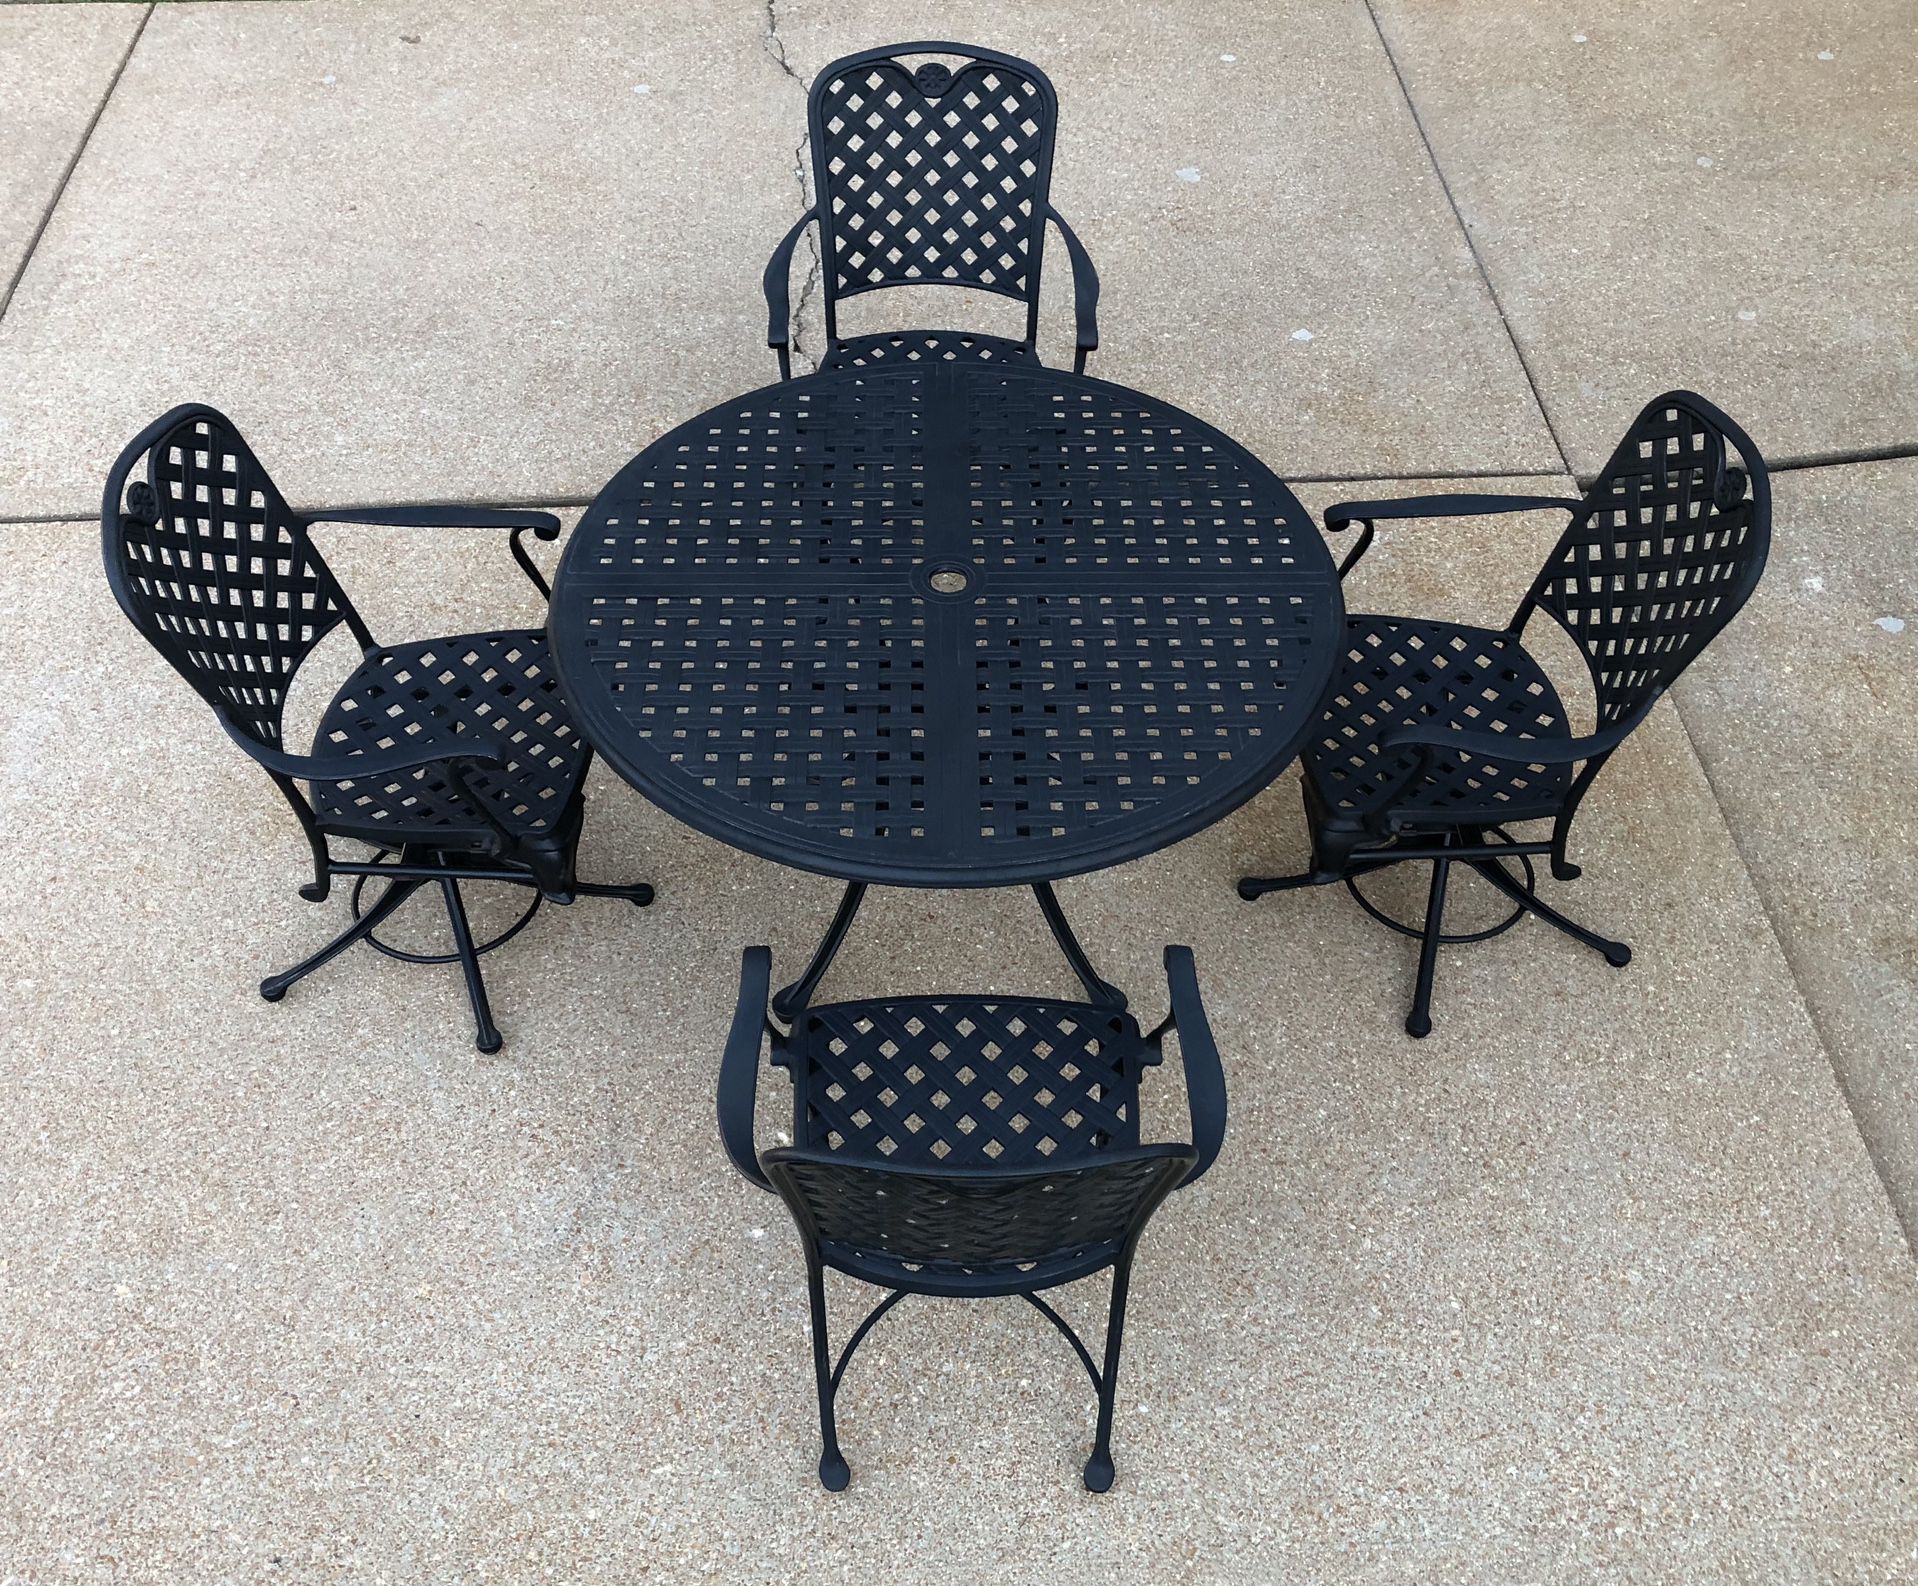 Summer Classics Provance High End Outdoor Patio Furniture 5Pc Dining Set